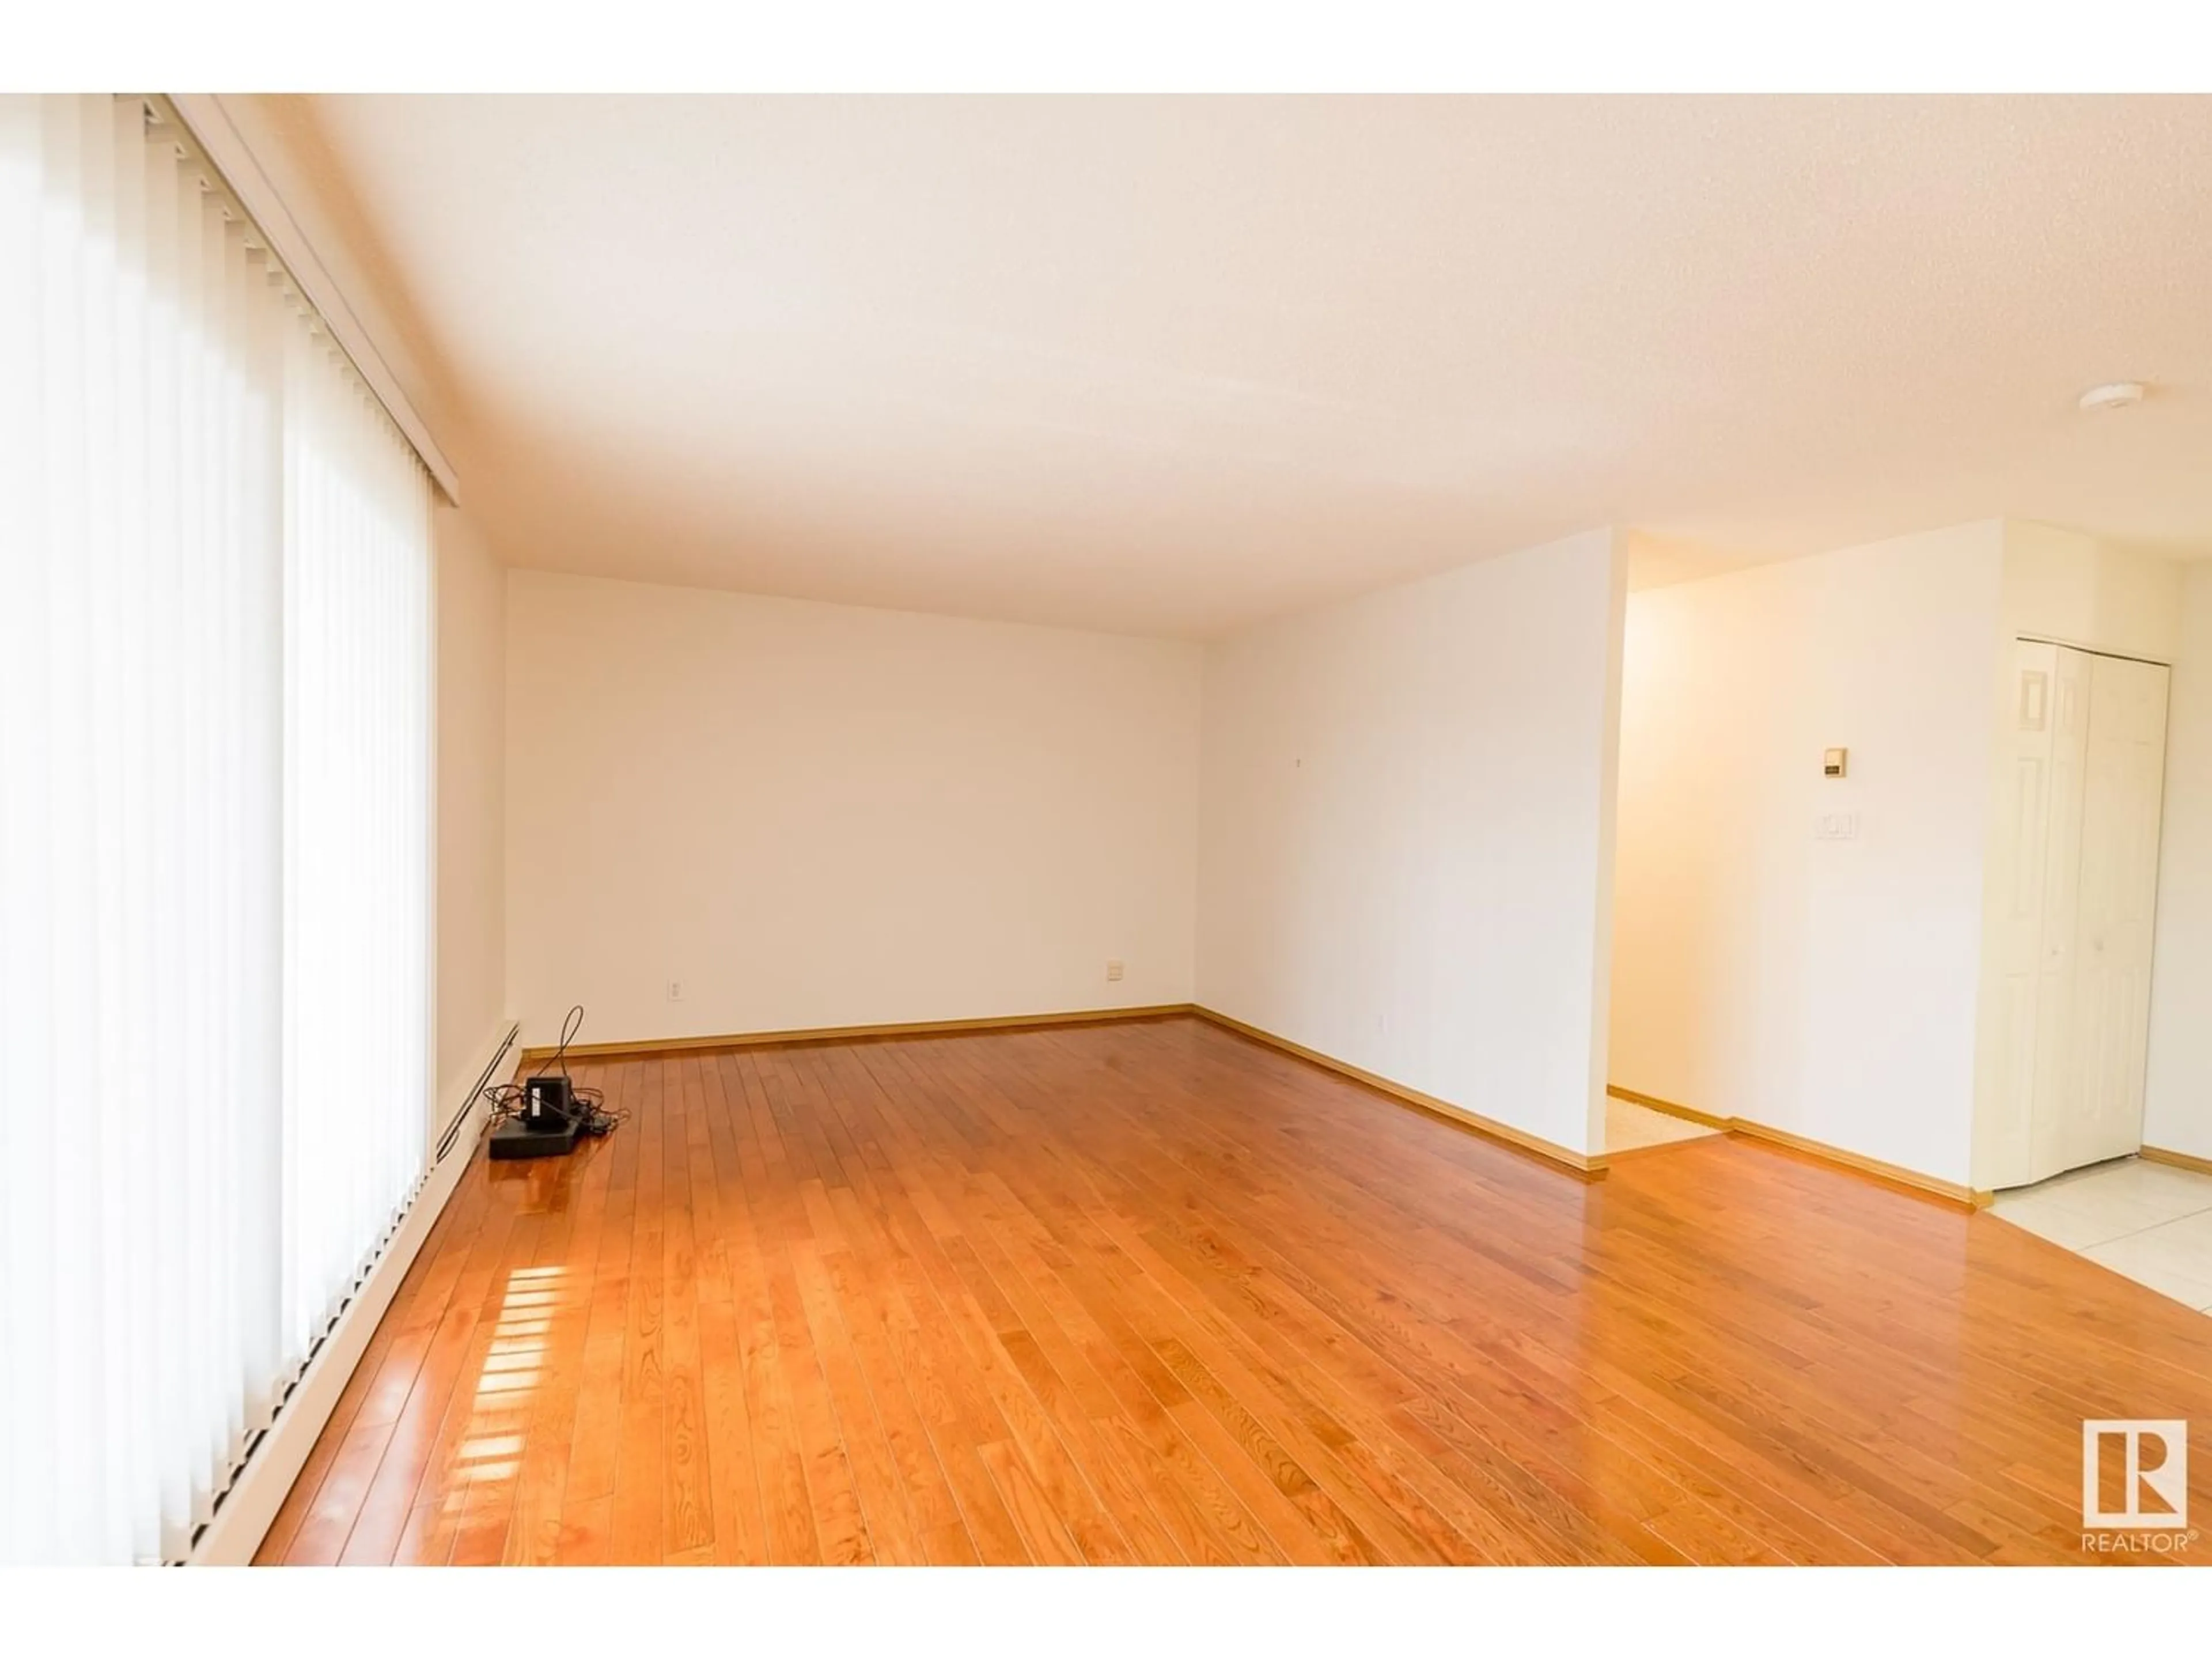 A pic of a room for #204 5520 RIVERBEND RD NW, Edmonton Alberta T6H5G9